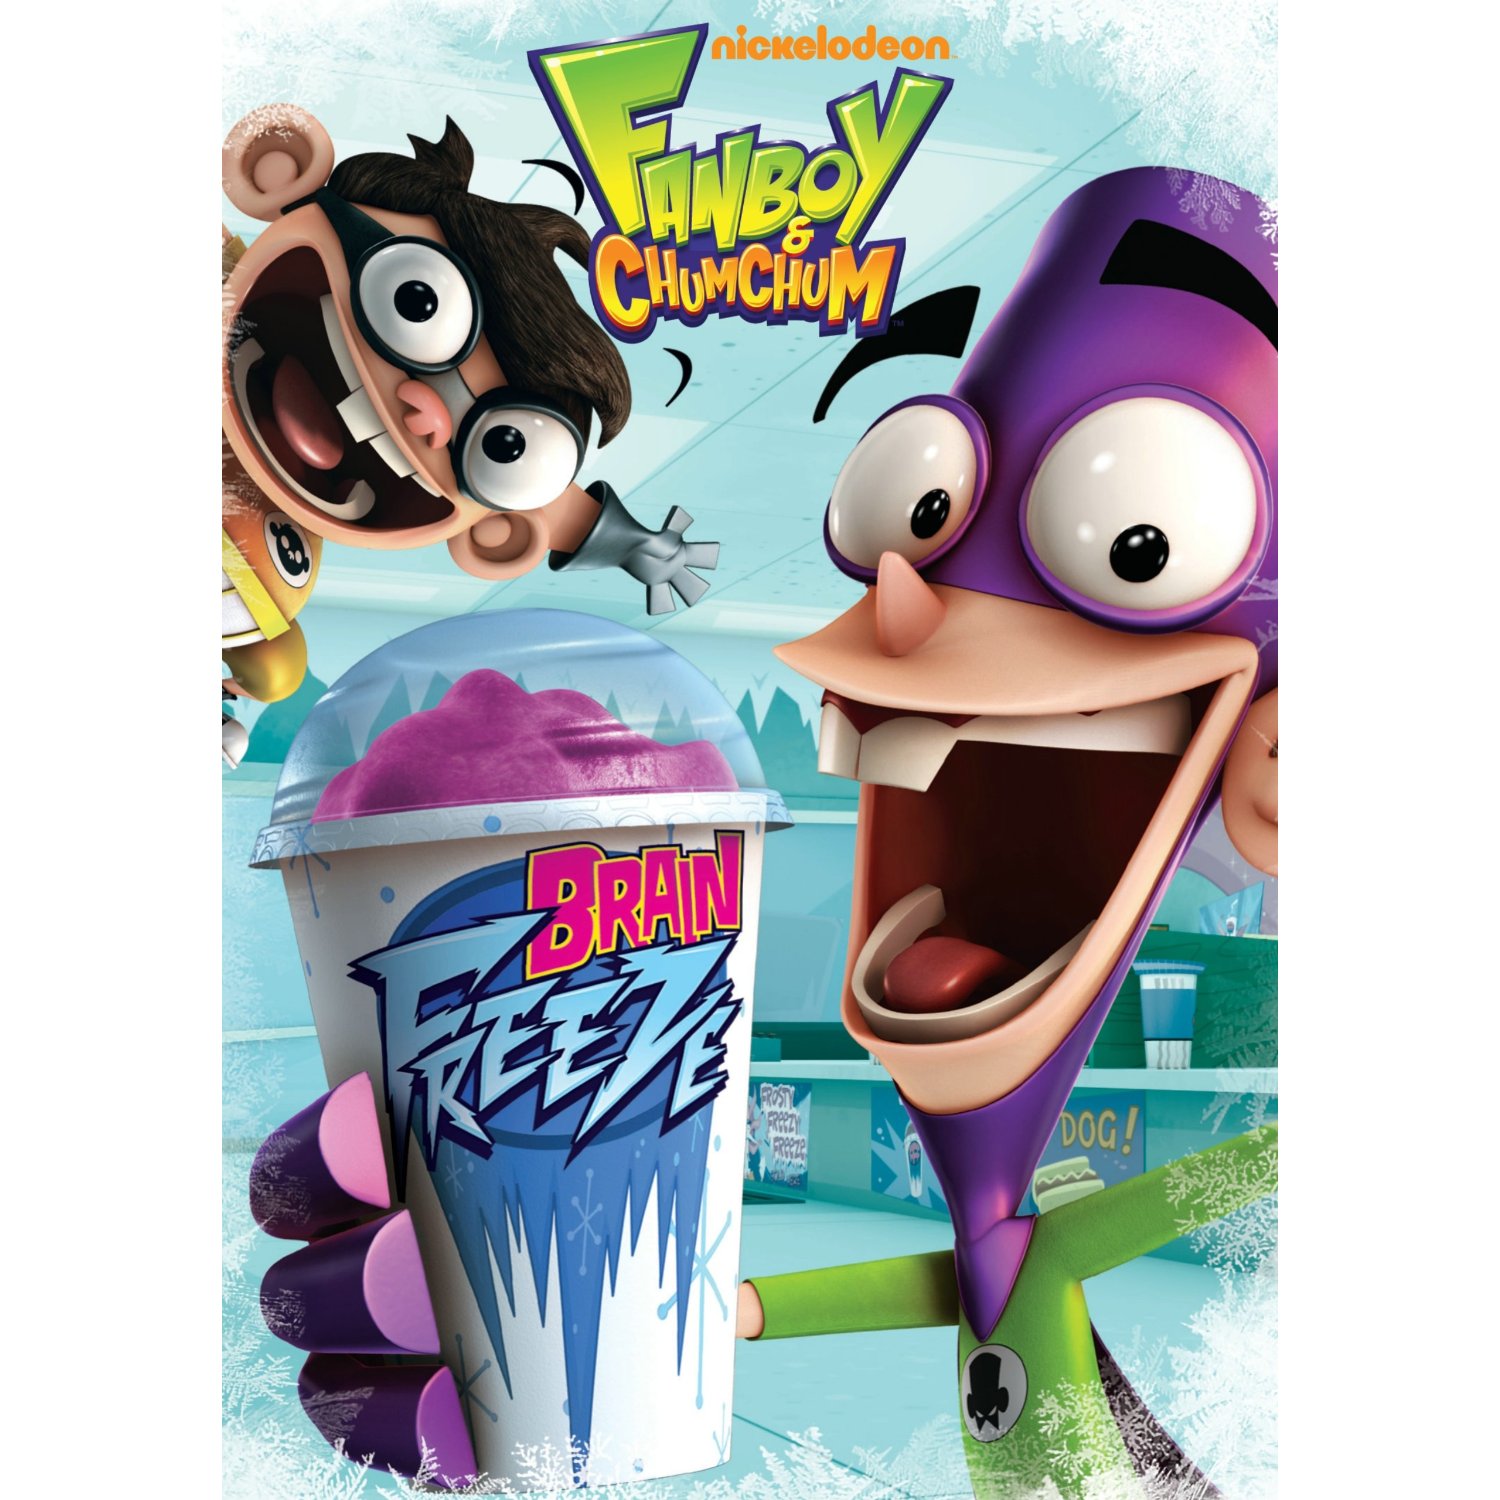 Fanboy and Chum Chum: Brain Freeze out on DVD – Giveaway